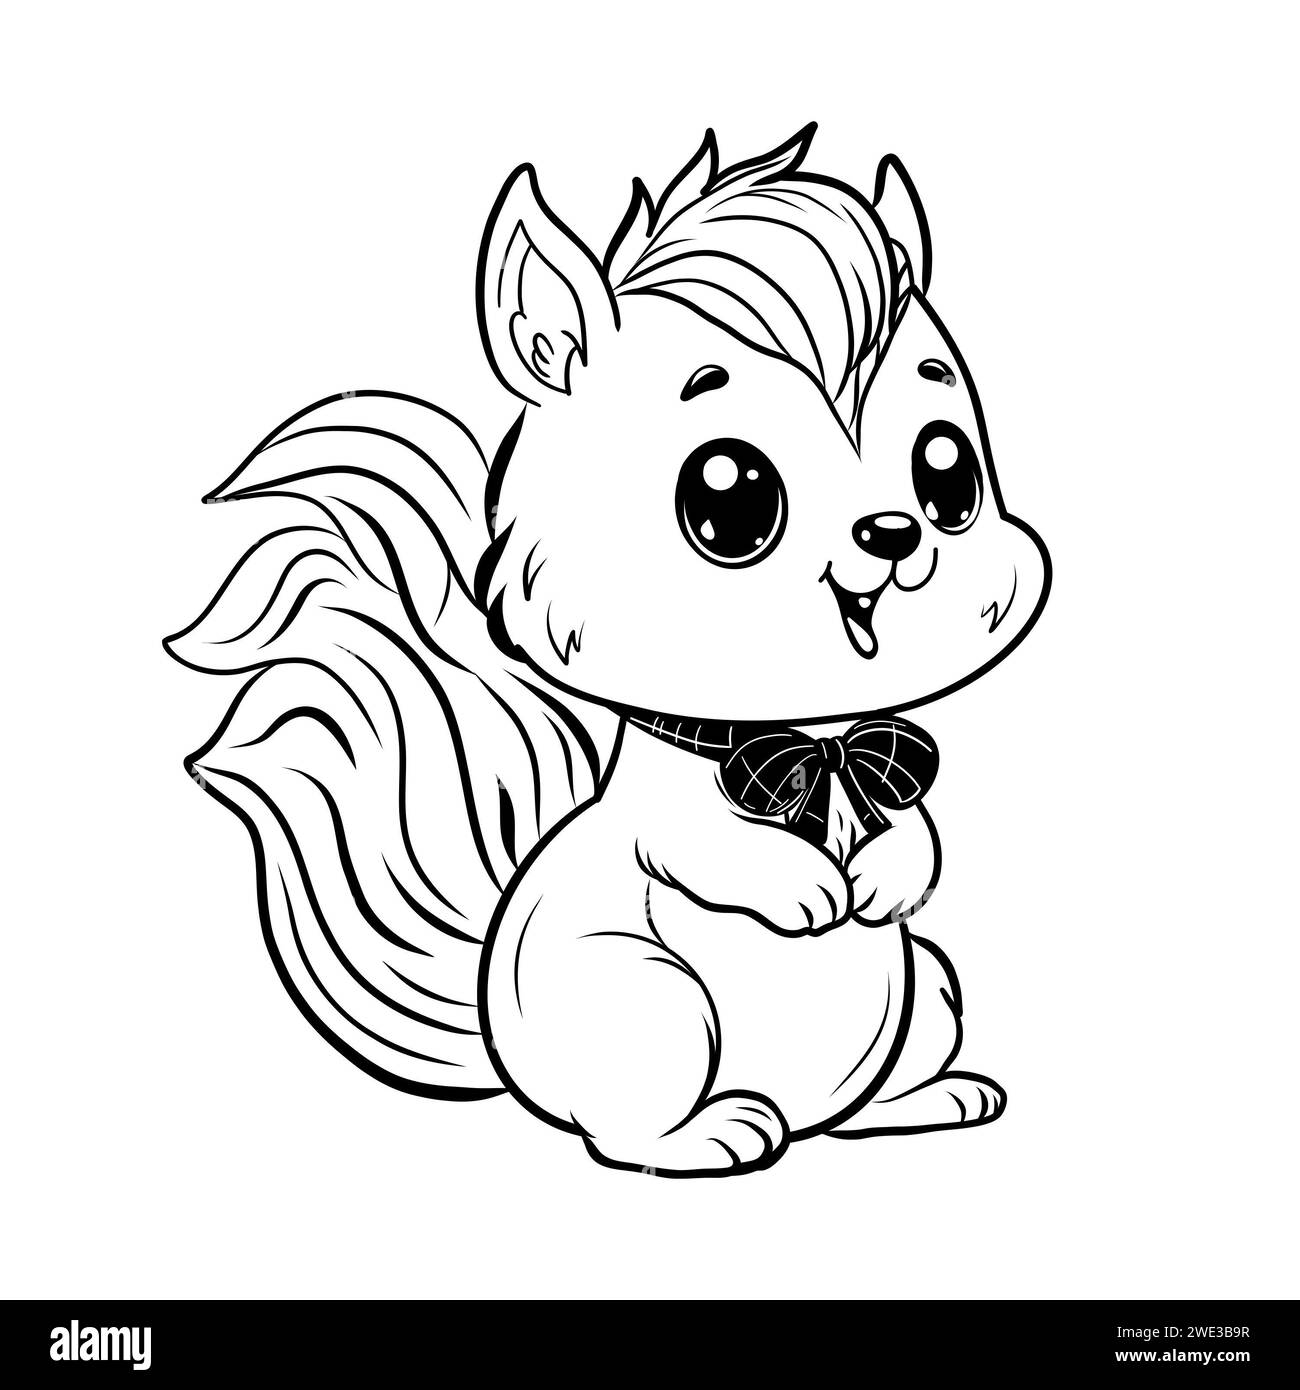 squirrel coloring book for children. Stock Photo